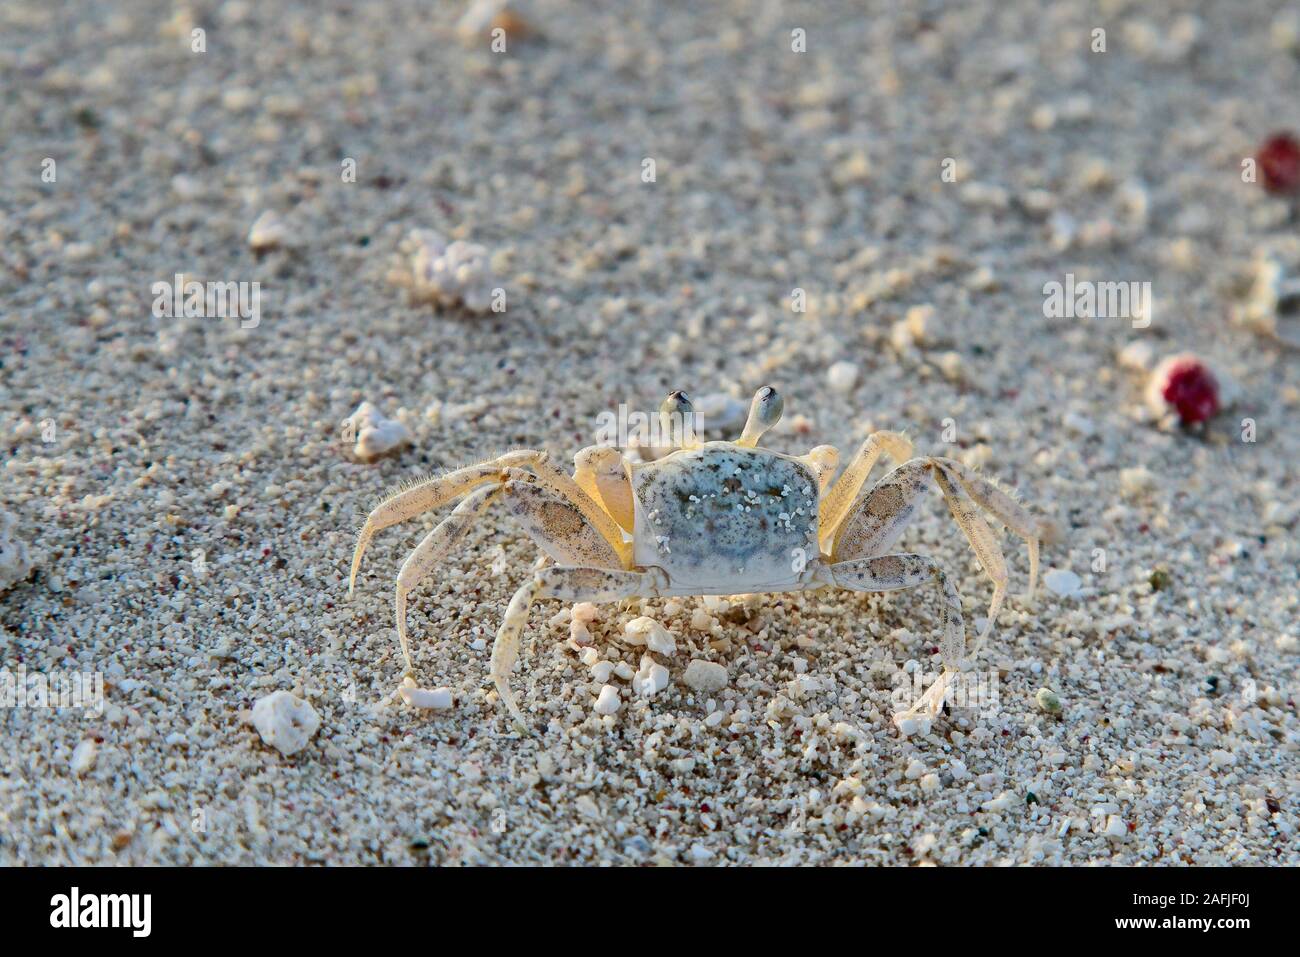 Atlantic ghost crab stands motionless on the beach. Stock Photo